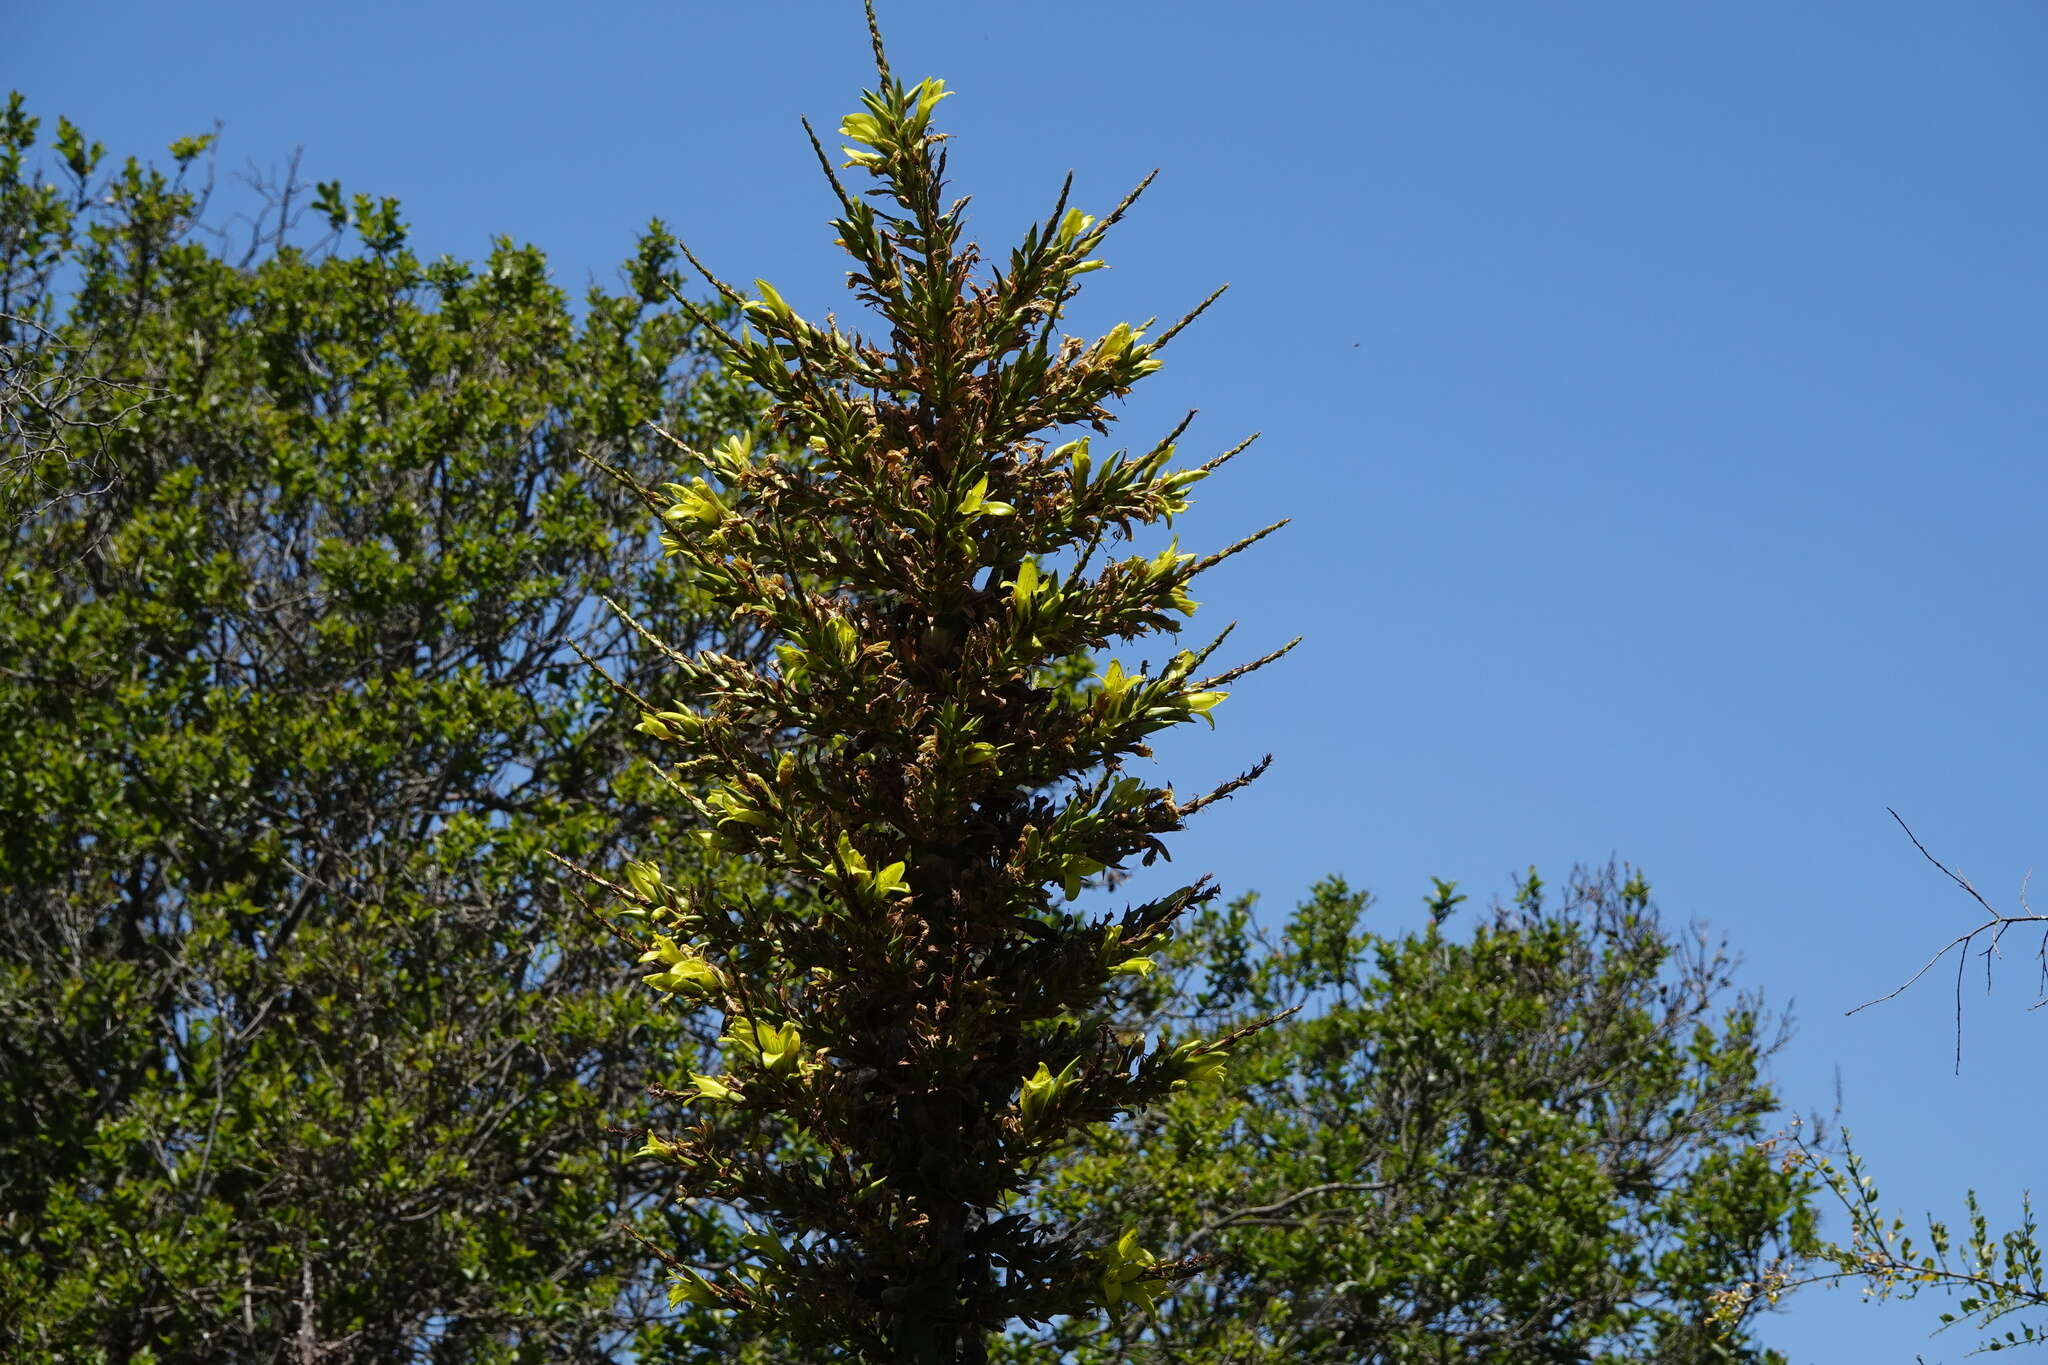 Image of Chilean Puya